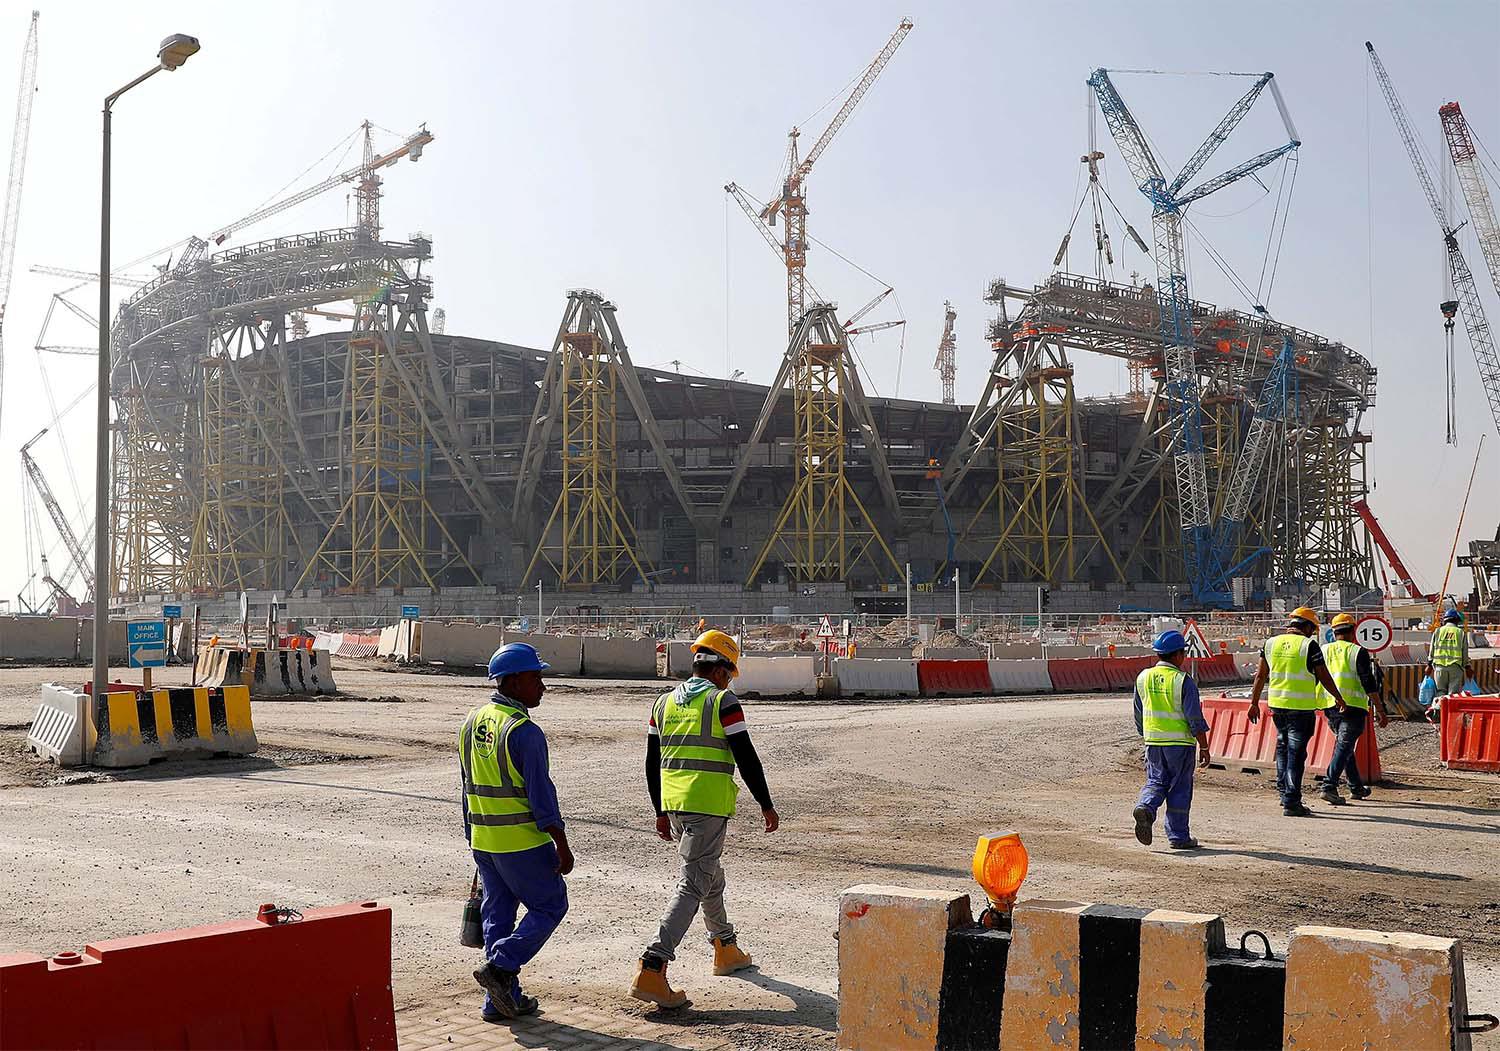 Workers walk towards the construction site of the Lusail stadium in Doha